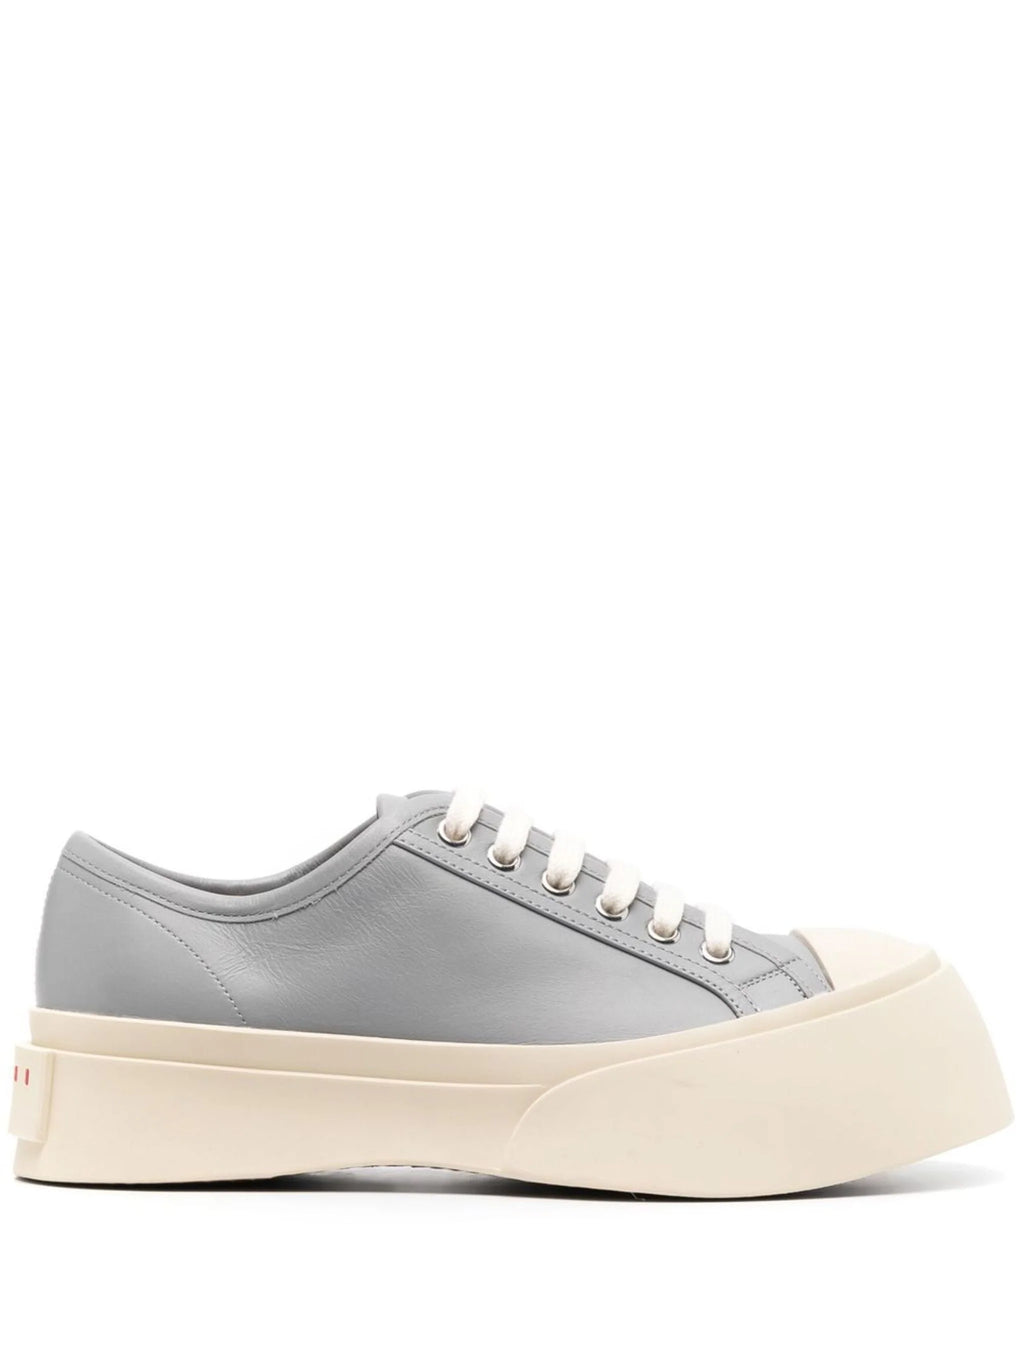 MARNI Women Leather Pablo Lace-Up Sneakers